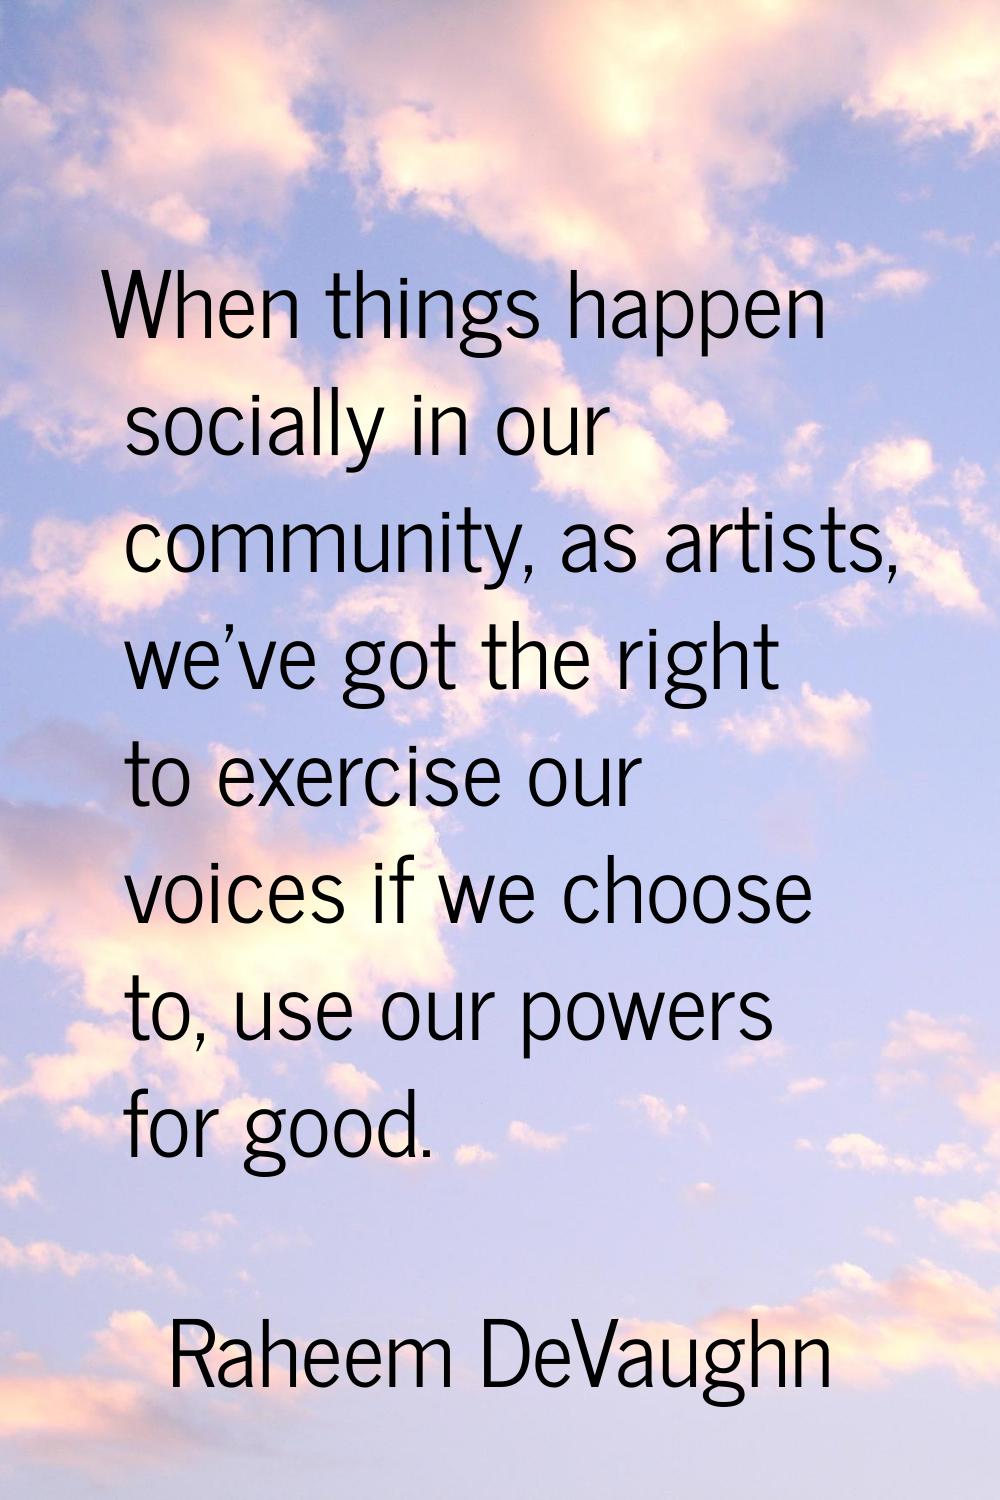 When things happen socially in our community, as artists, we've got the right to exercise our voice